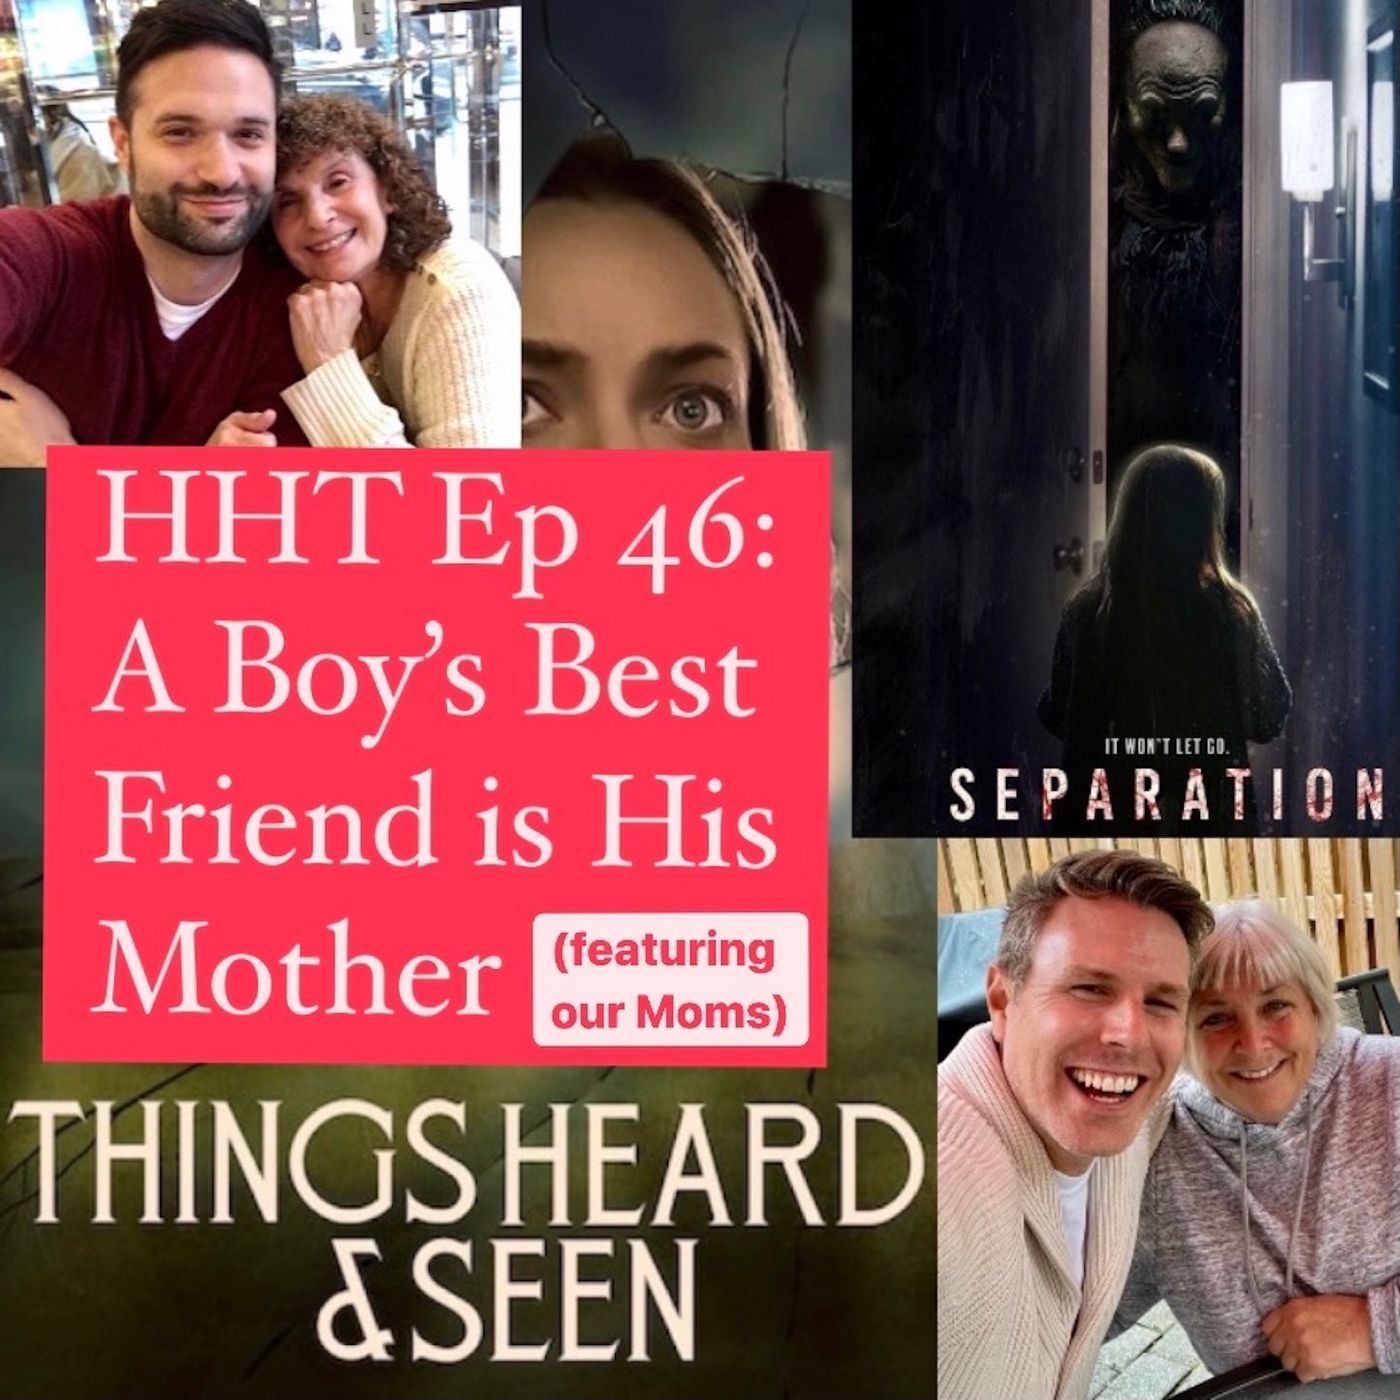 Ep 46: A Boy's Best Friend is His Mother (featuring our Moms) Image